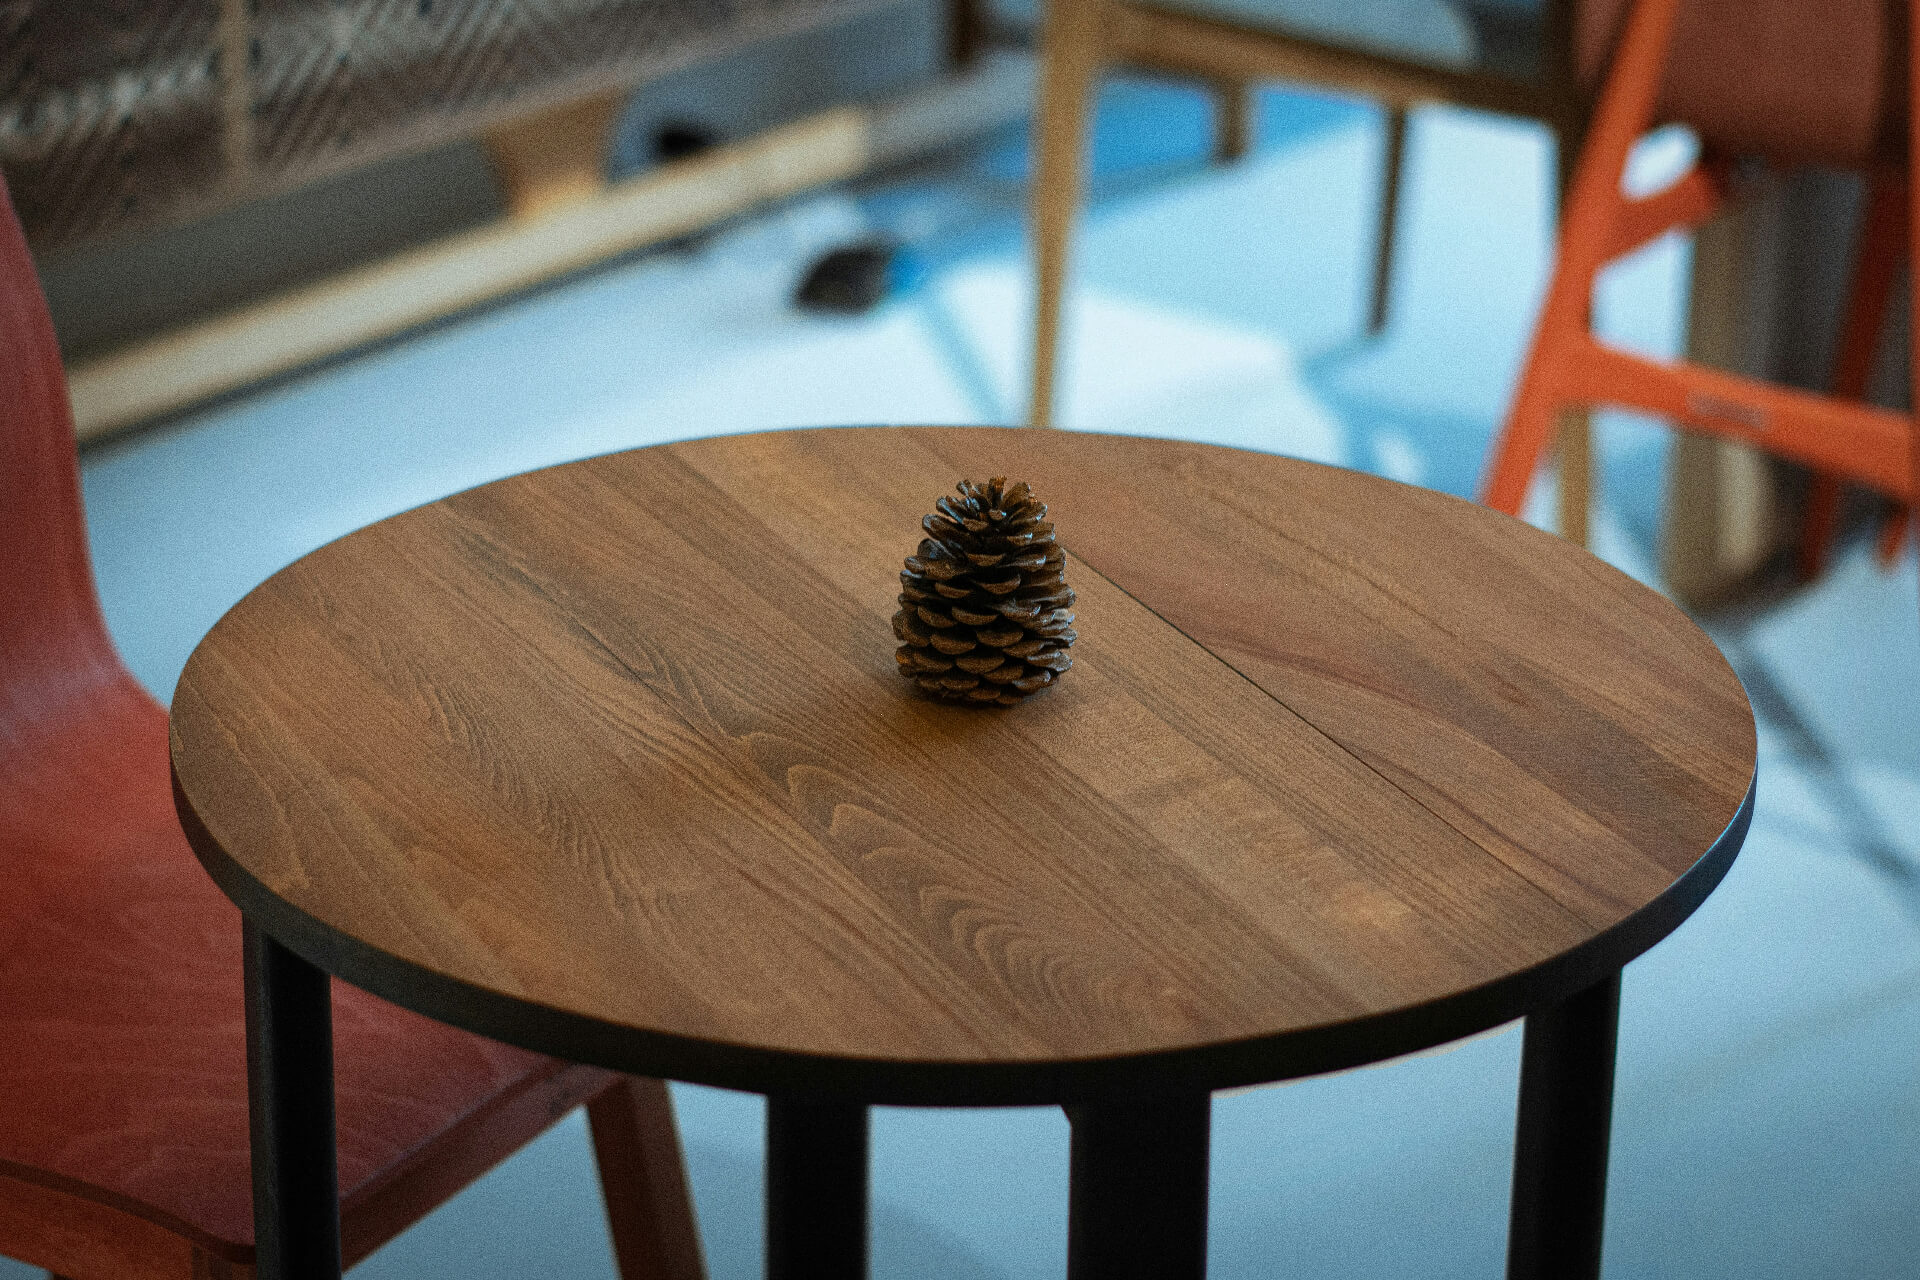 wood table with pine cone